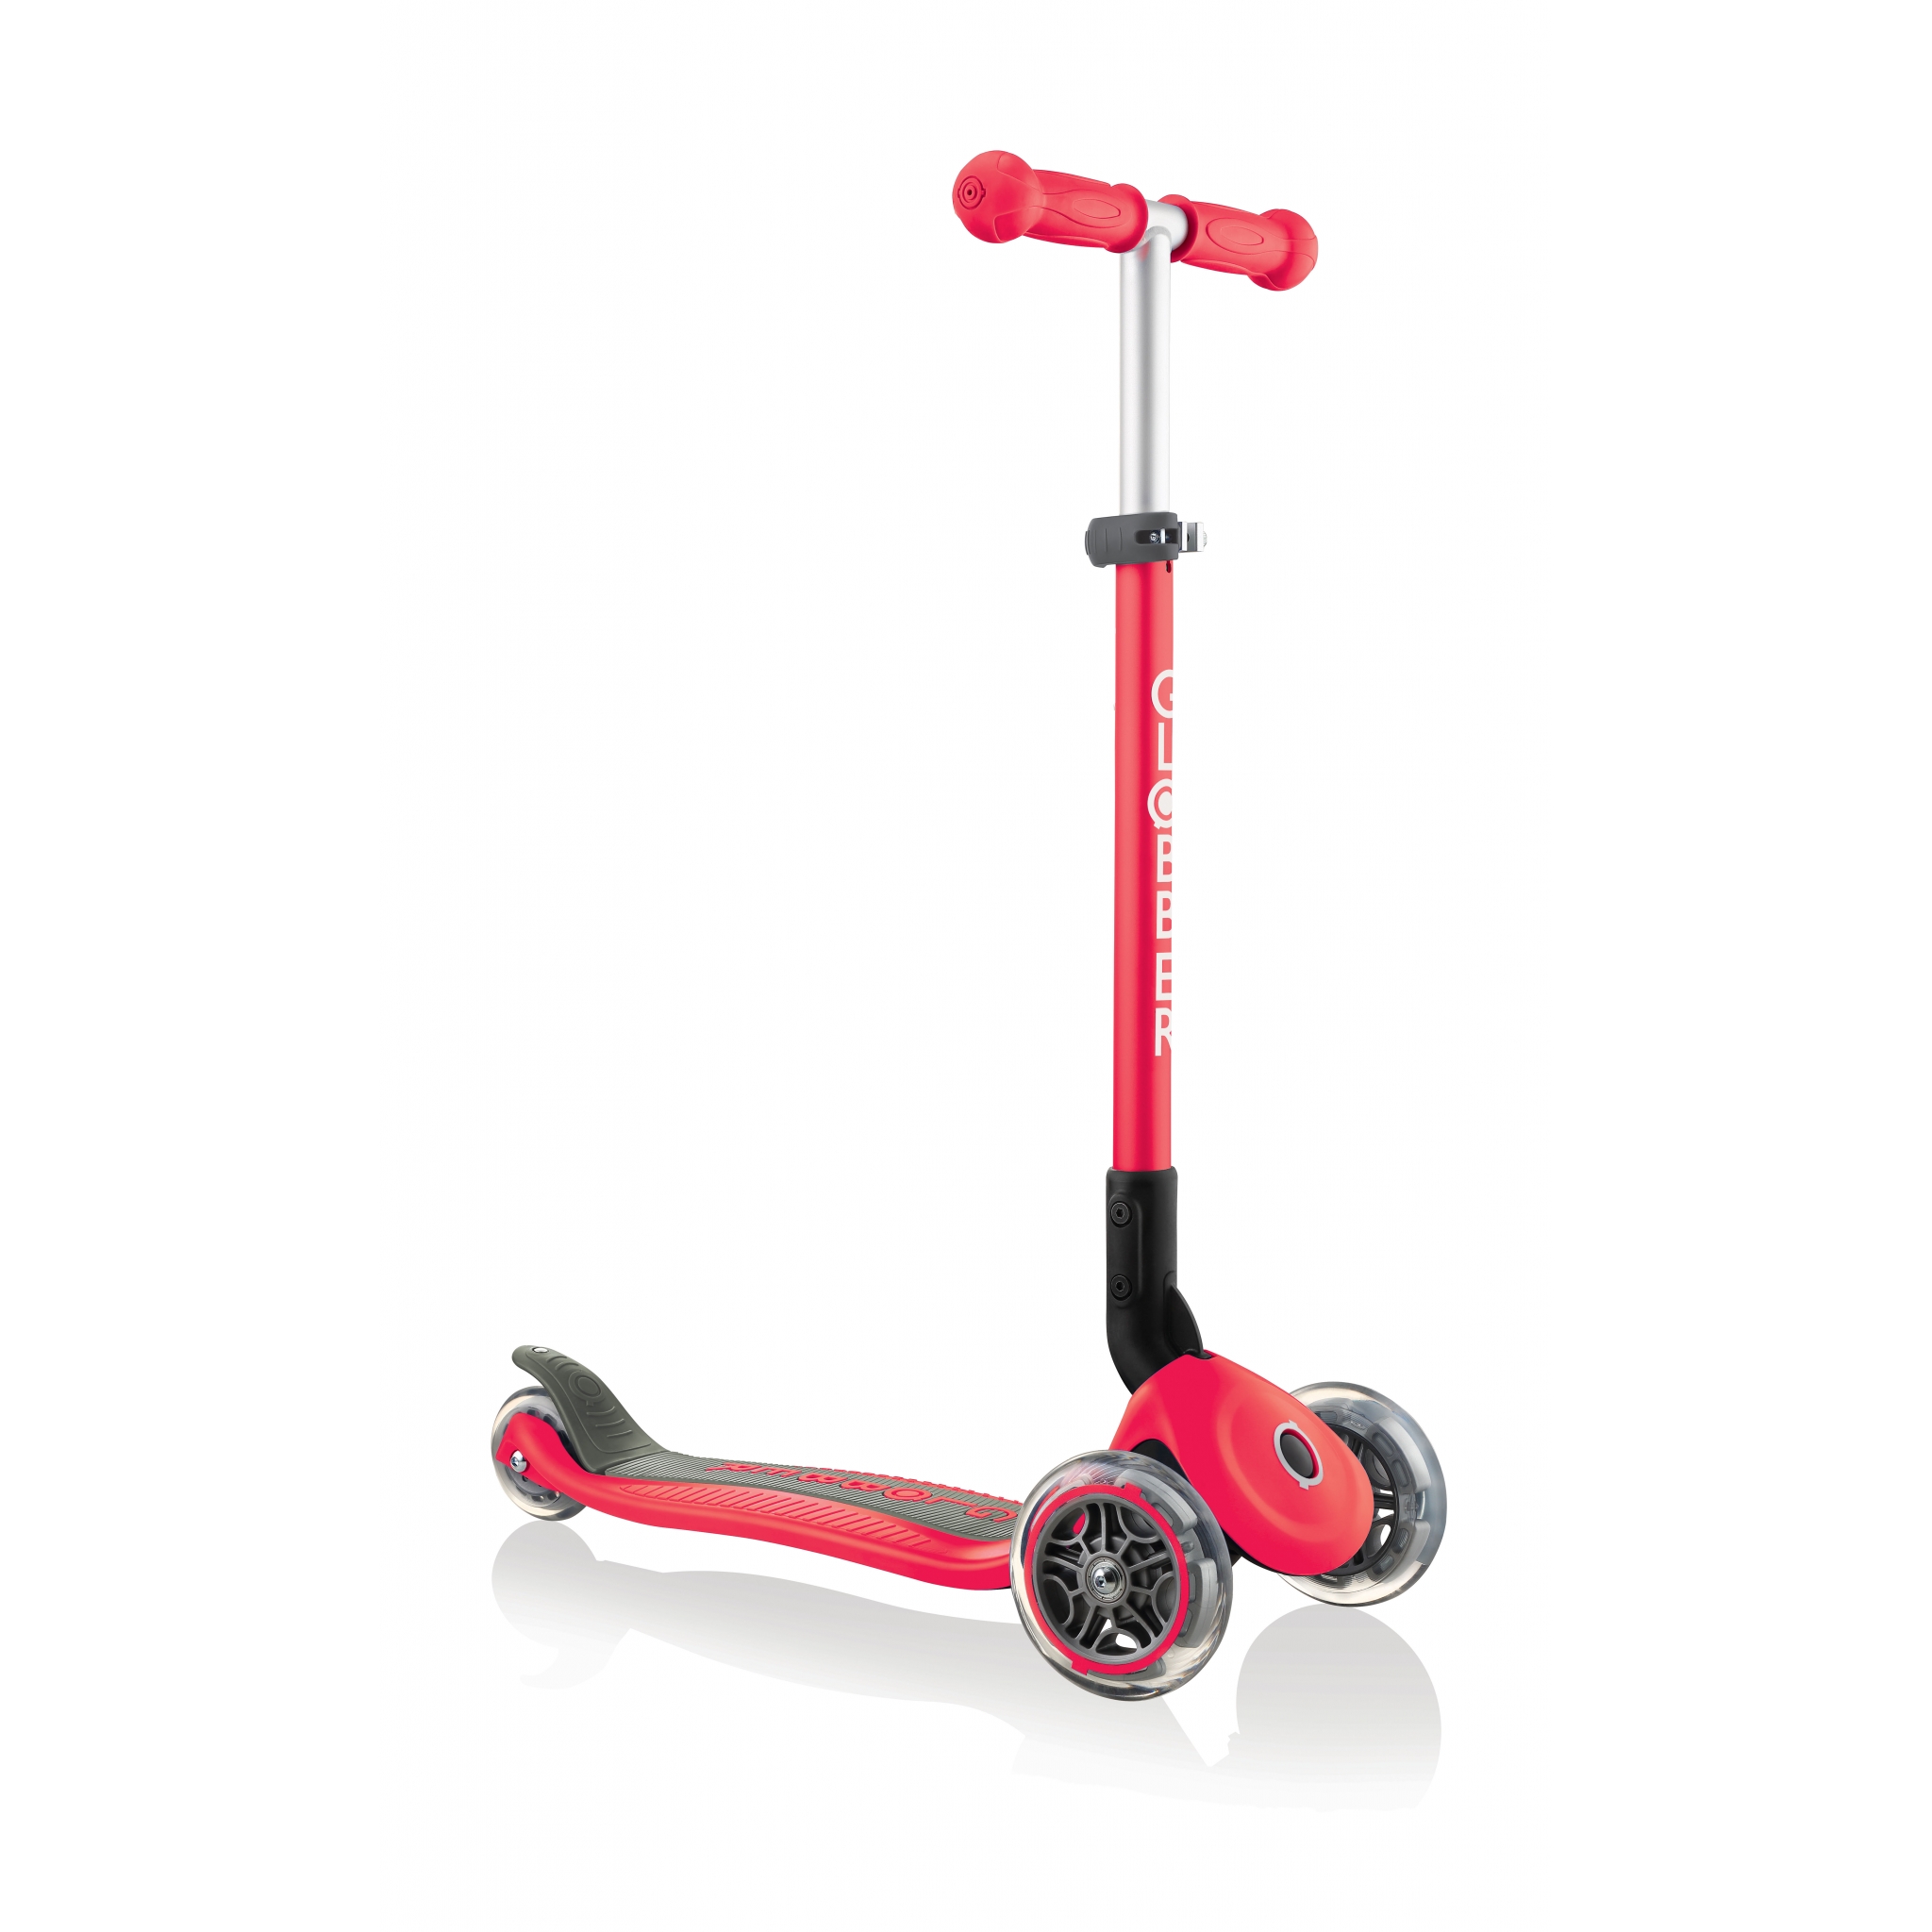 PRIMO-FOLDABLE-3-wheel-foldable-scooter-for-kids-new-red 2